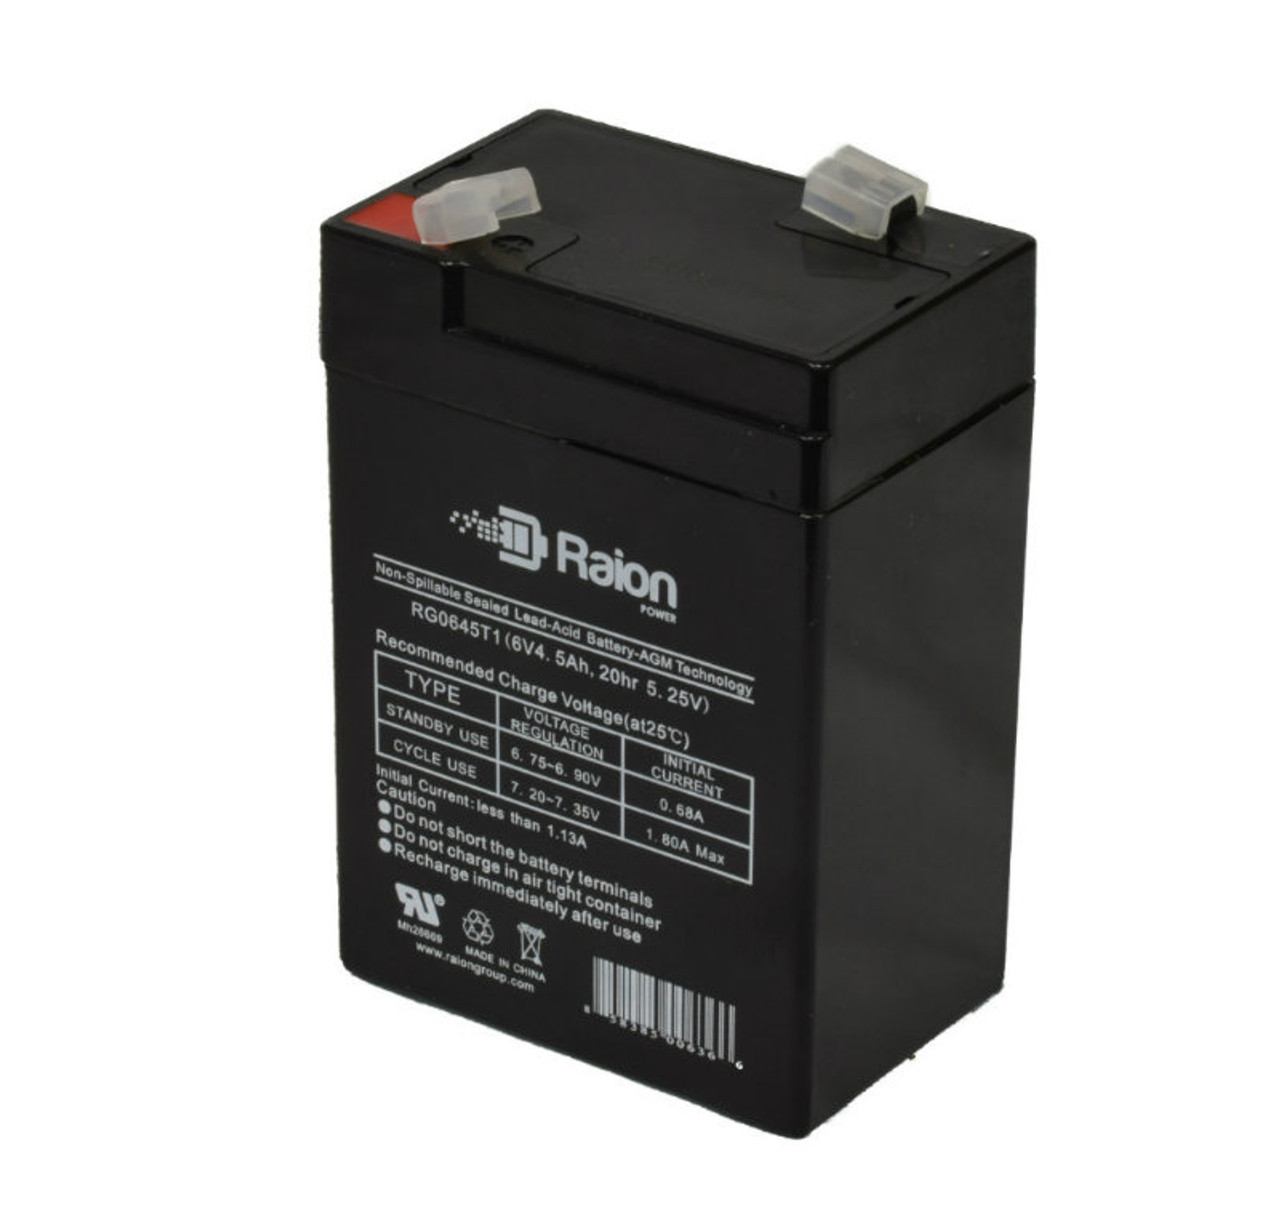 Raion Power RG0645T1 6V 4.5Ah Replacement Battery Cartridge for CSB GP645